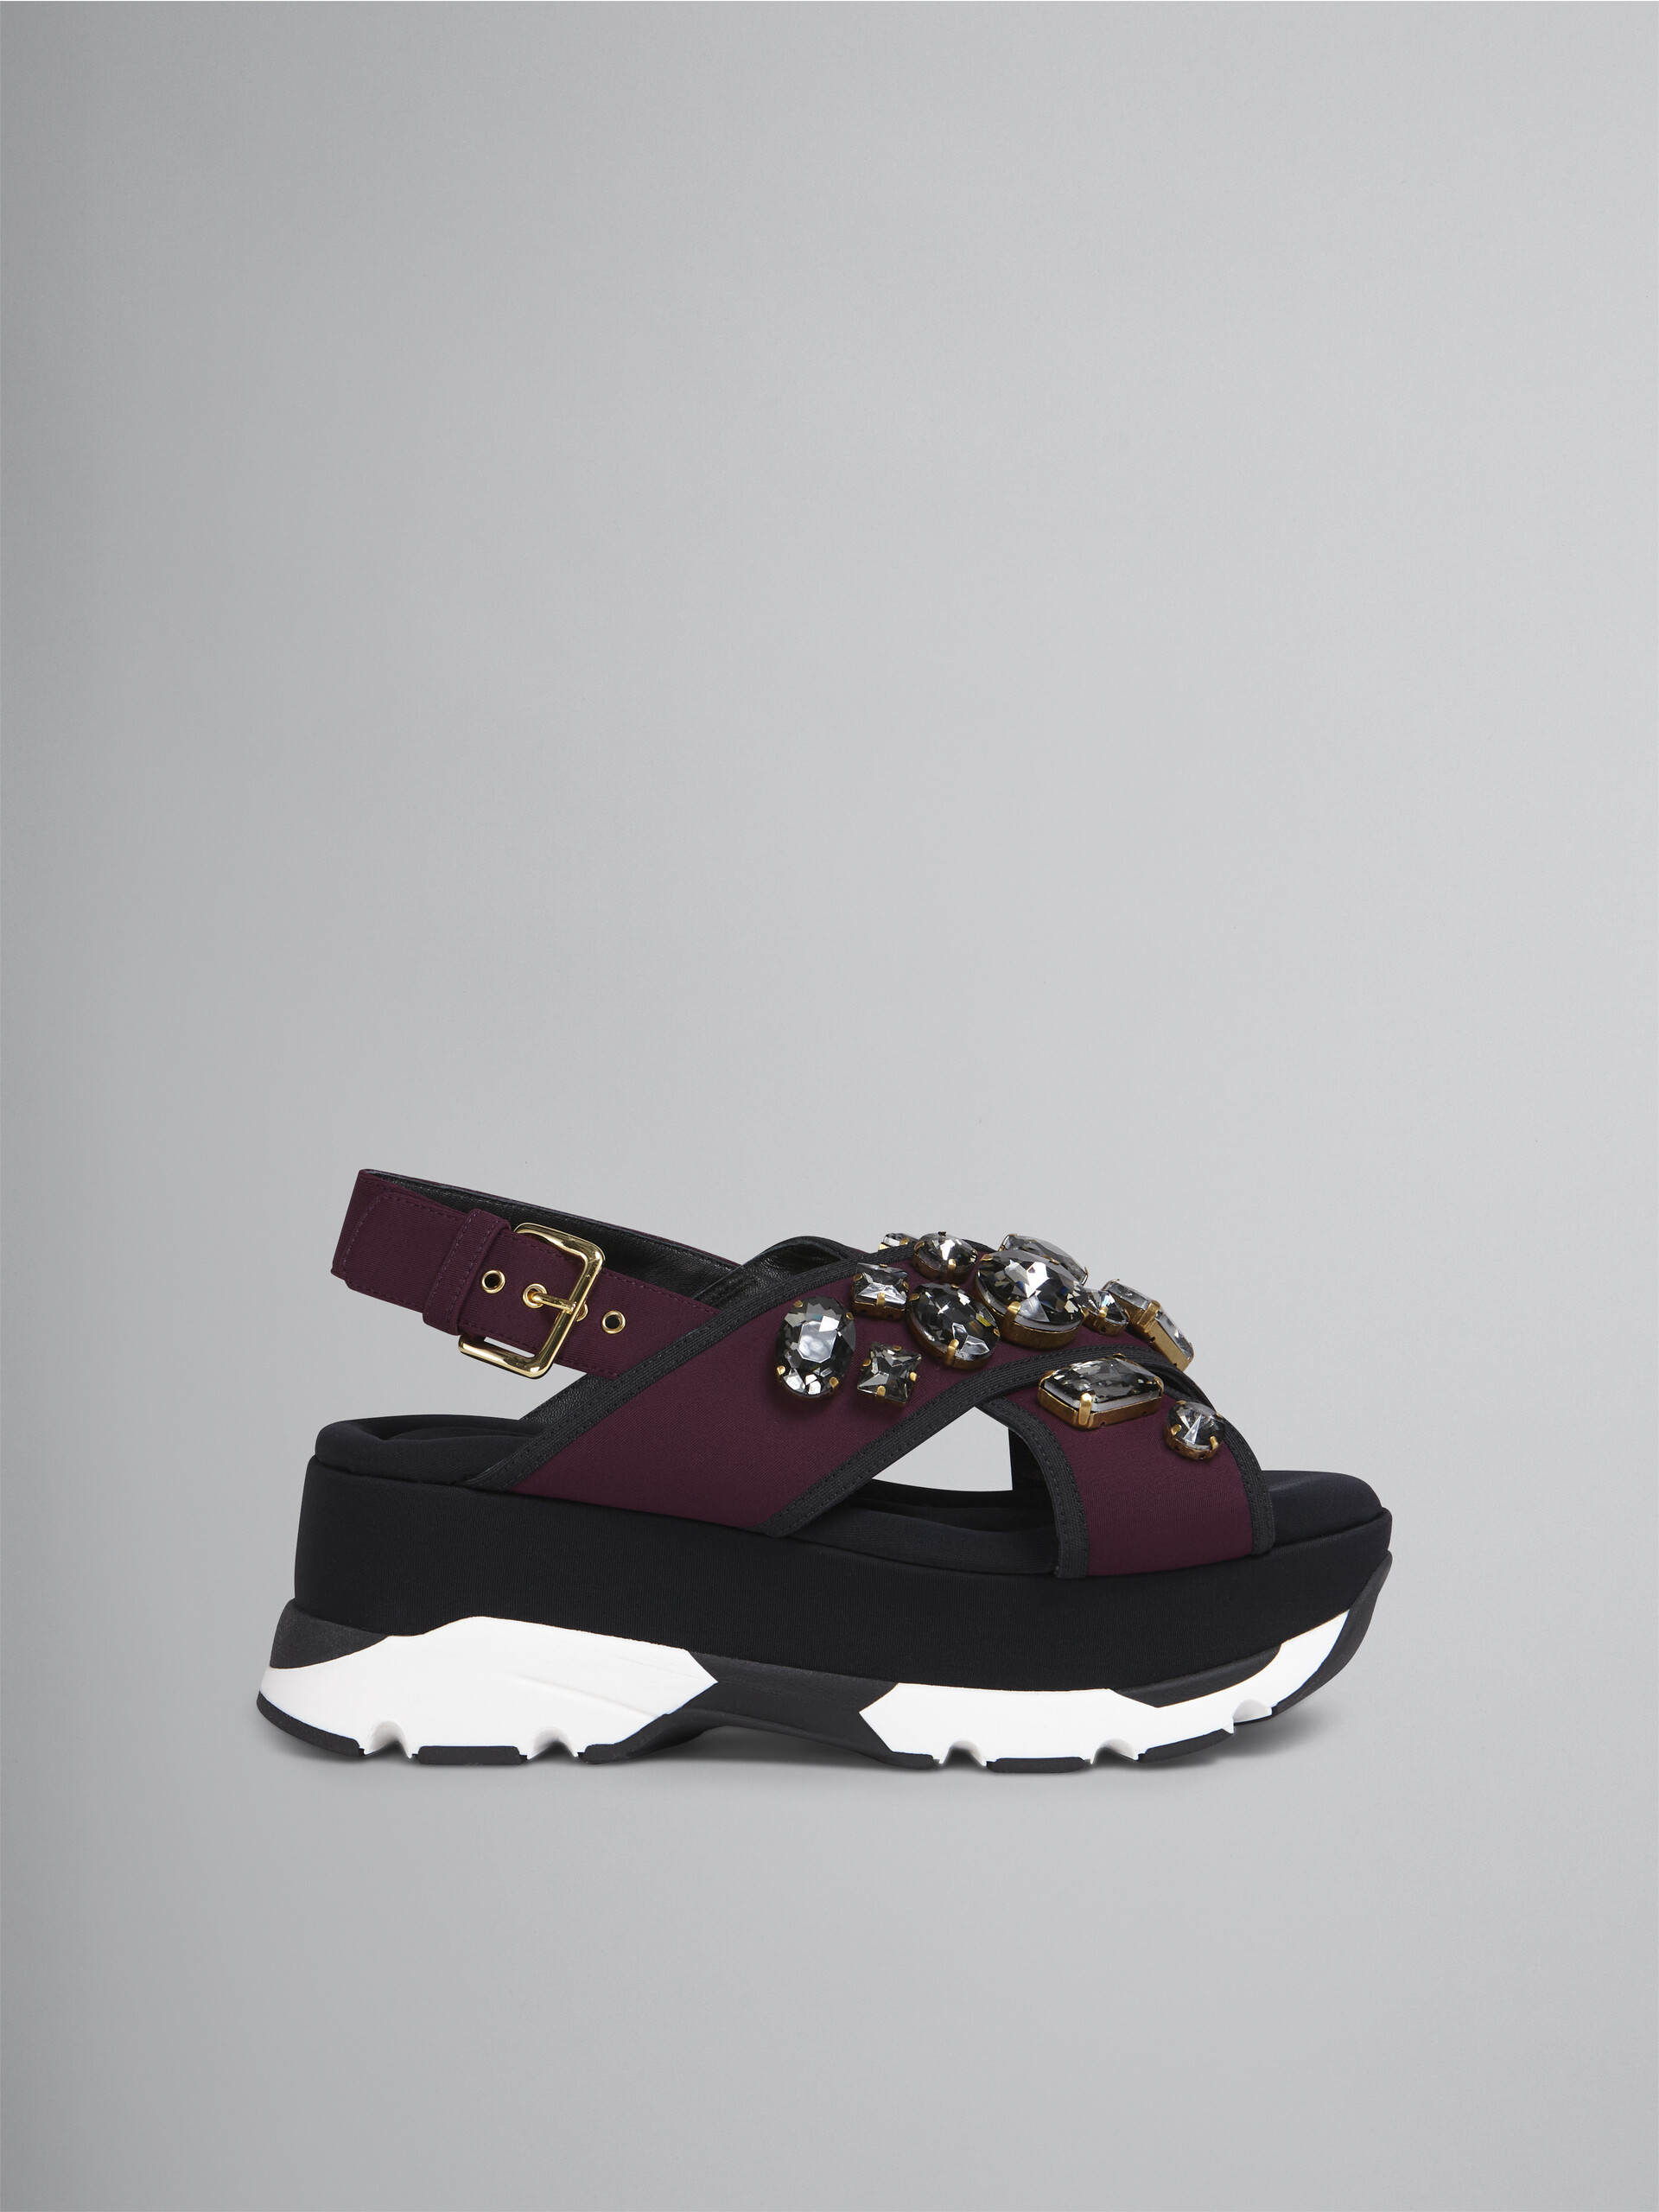 Burgundy and black wedge in technical fabric - Sandals - Image 1